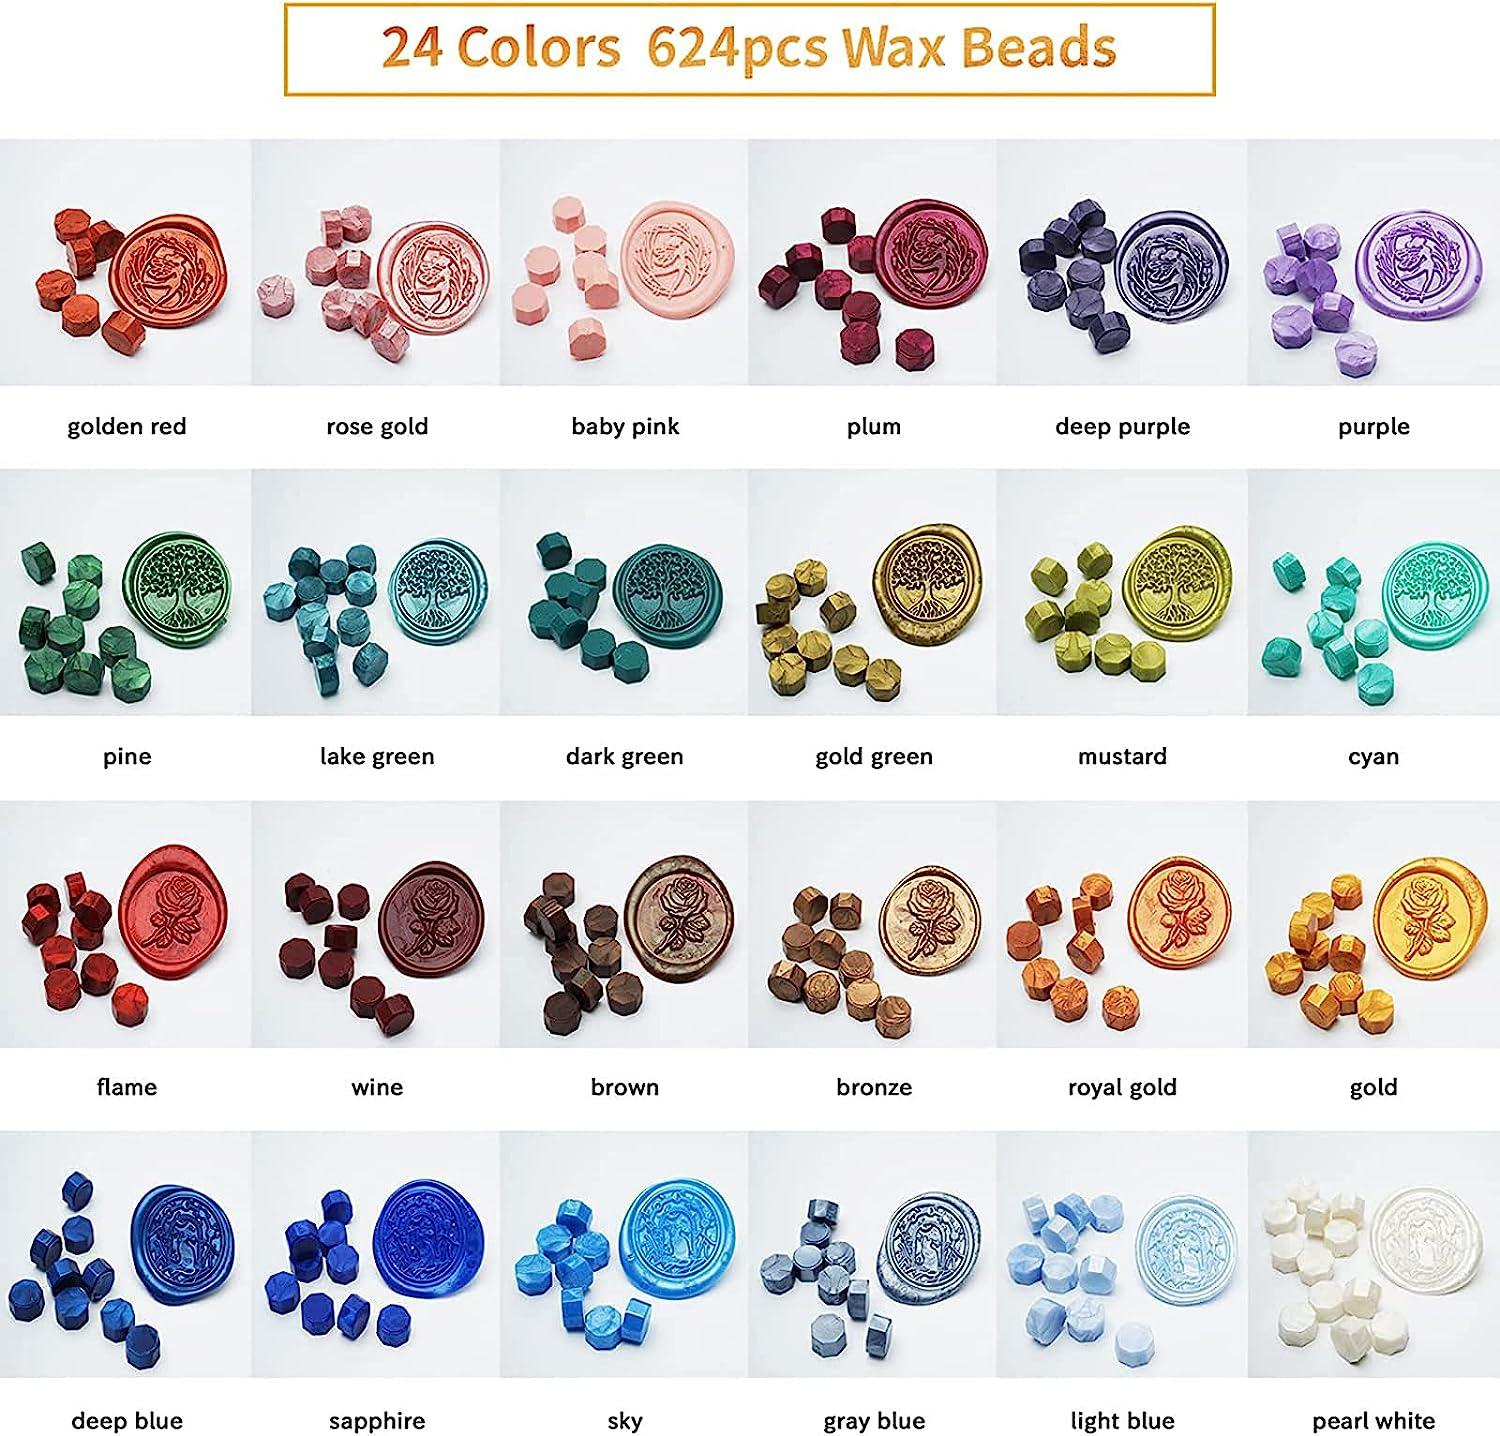 Wax Seal Beads - Sealing Wax Beads for Stamp Seals Letter Sealing Wax Melts Kit for Stamps Melting Wax for Sealing Envelopes Multi Colors - Style